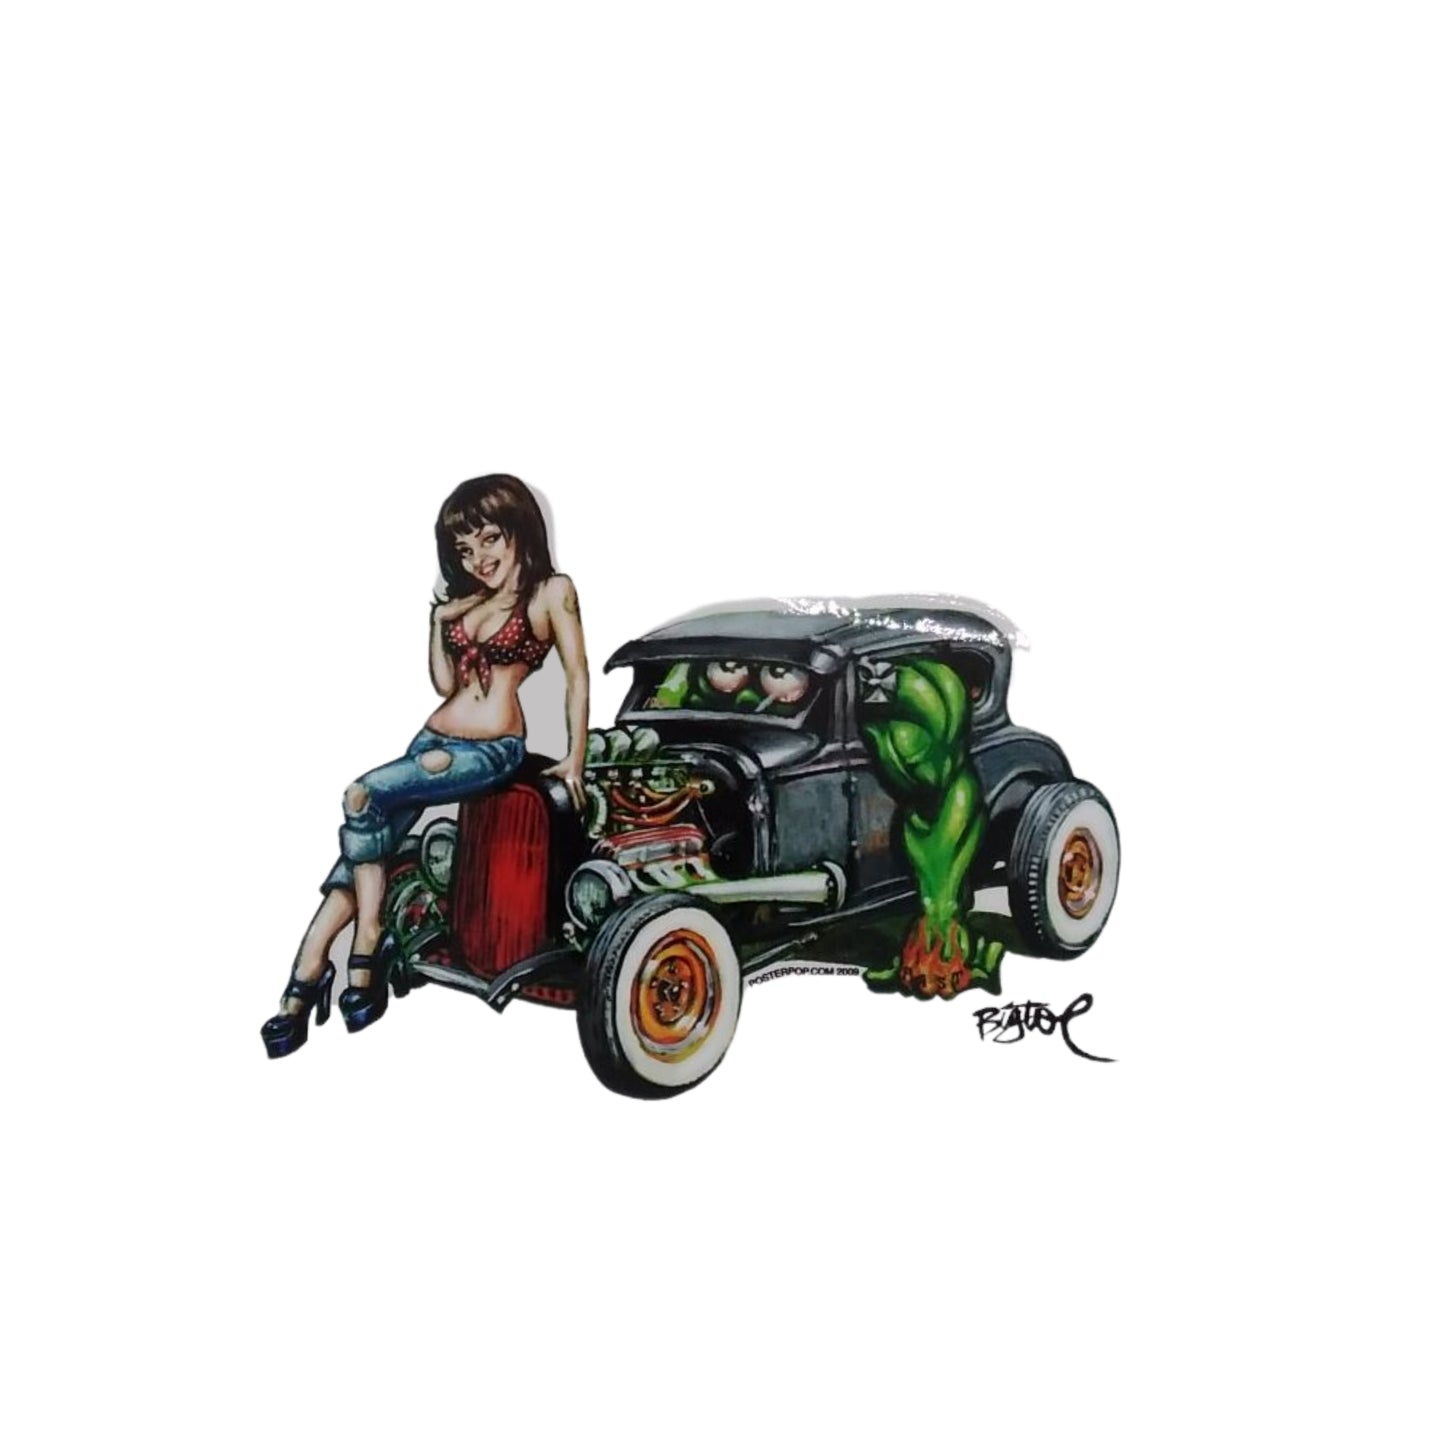 BigToe Hot Rod and Girl - Sticker